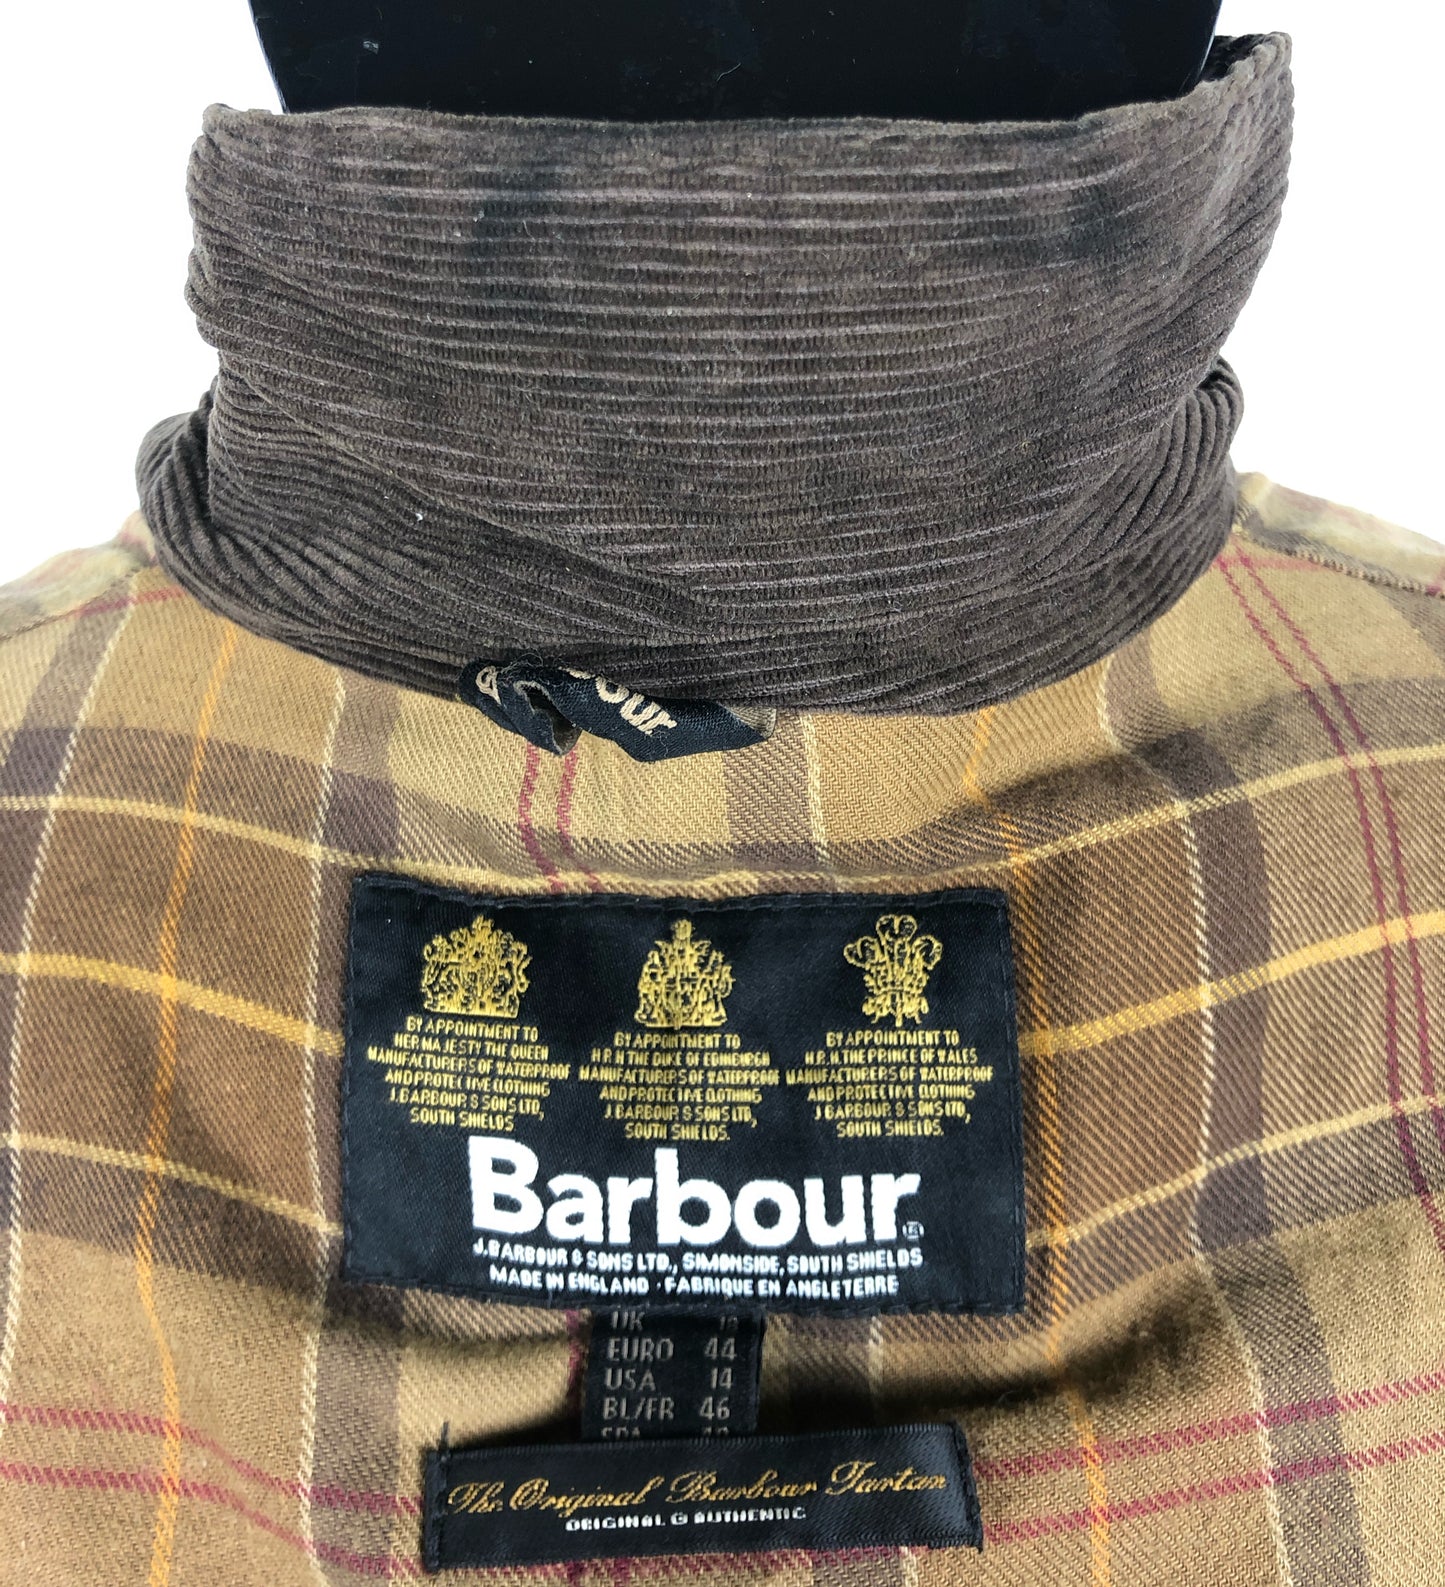 Giacca Barbour Marrone Newmarket mac cerato UNISEX Tg.48 Brown Wax Jacket UK18